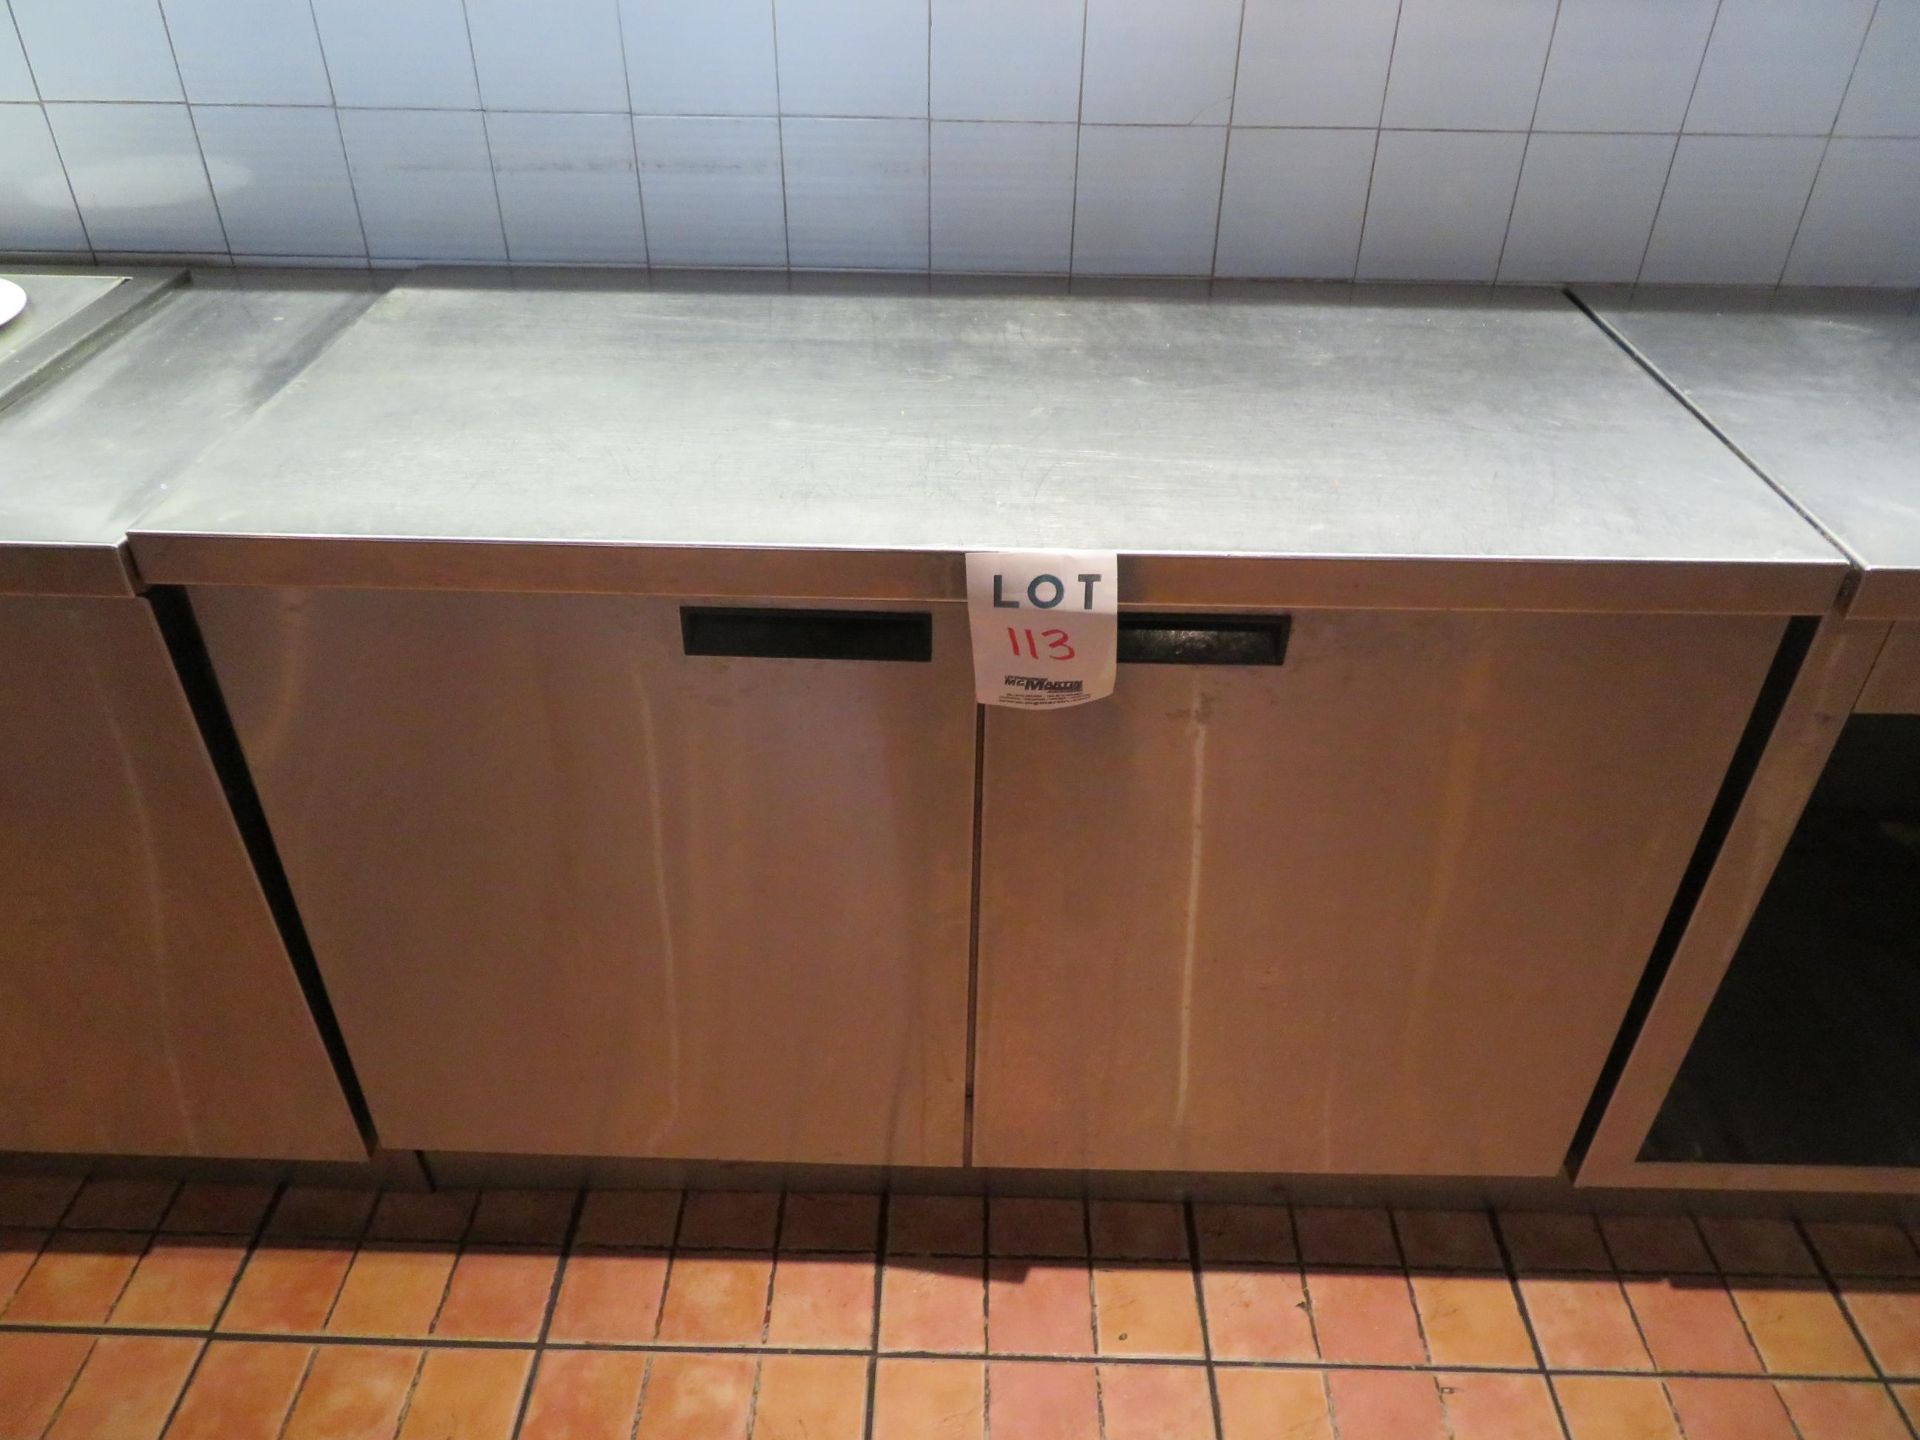 2 door refrigerated stainless steel counter approx. 48"w x 24"d x 35"h